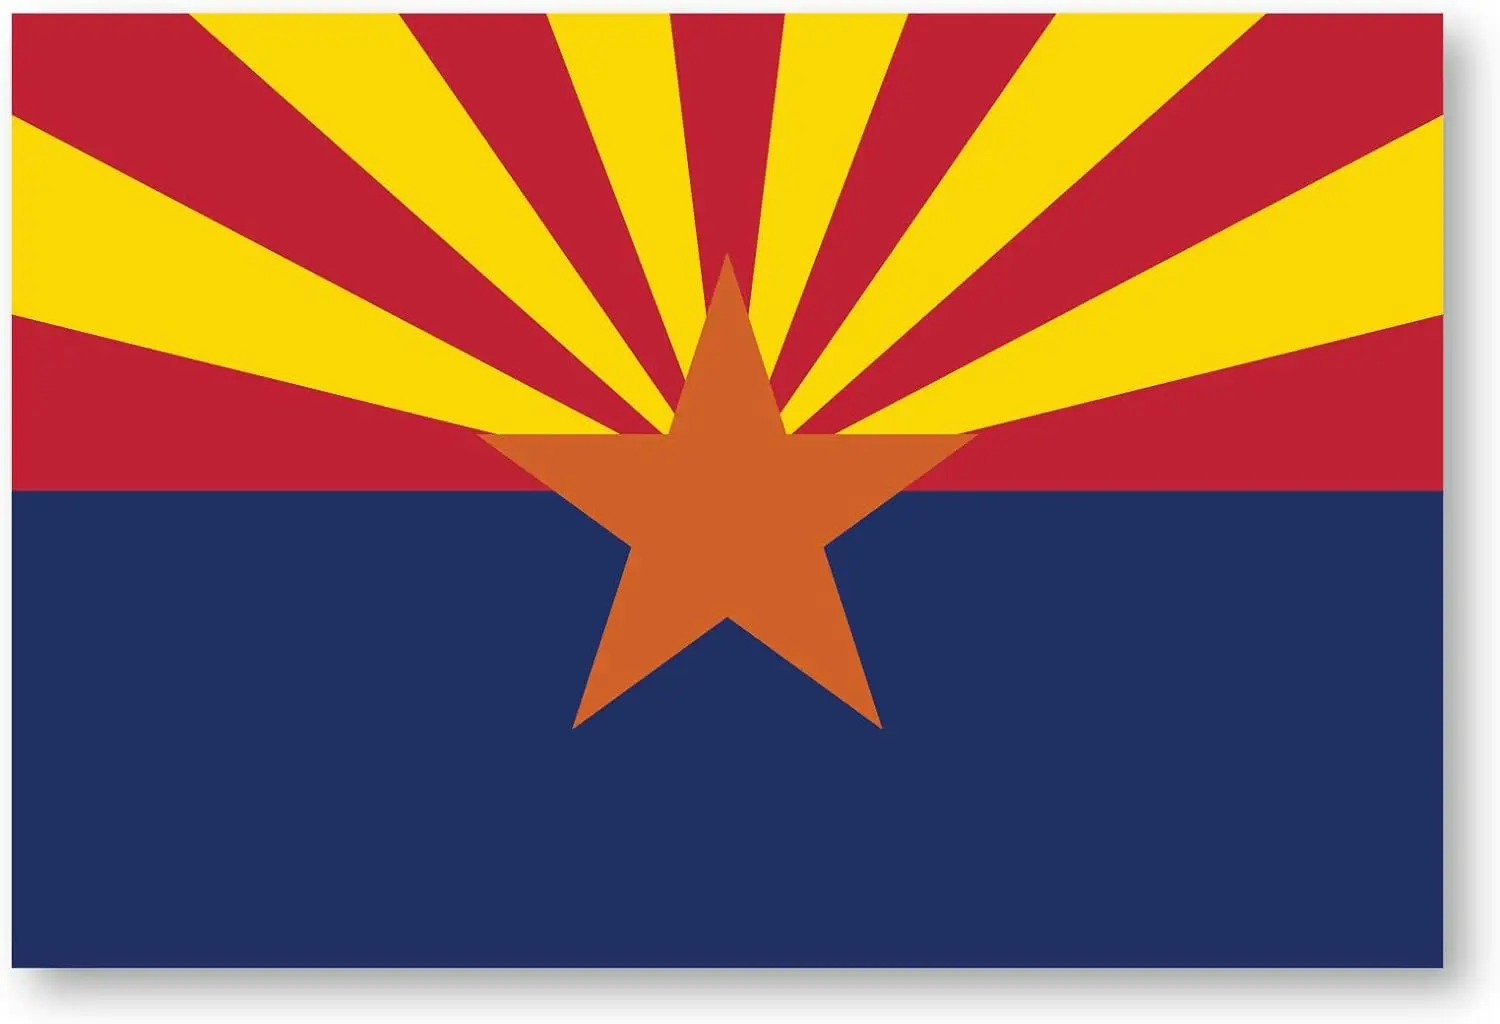 

Arizona Flag Vinyl Decal Bumper Sticker Sticker, suitable for cups, glasses, cars, laptops, windows, trucks, and coolers